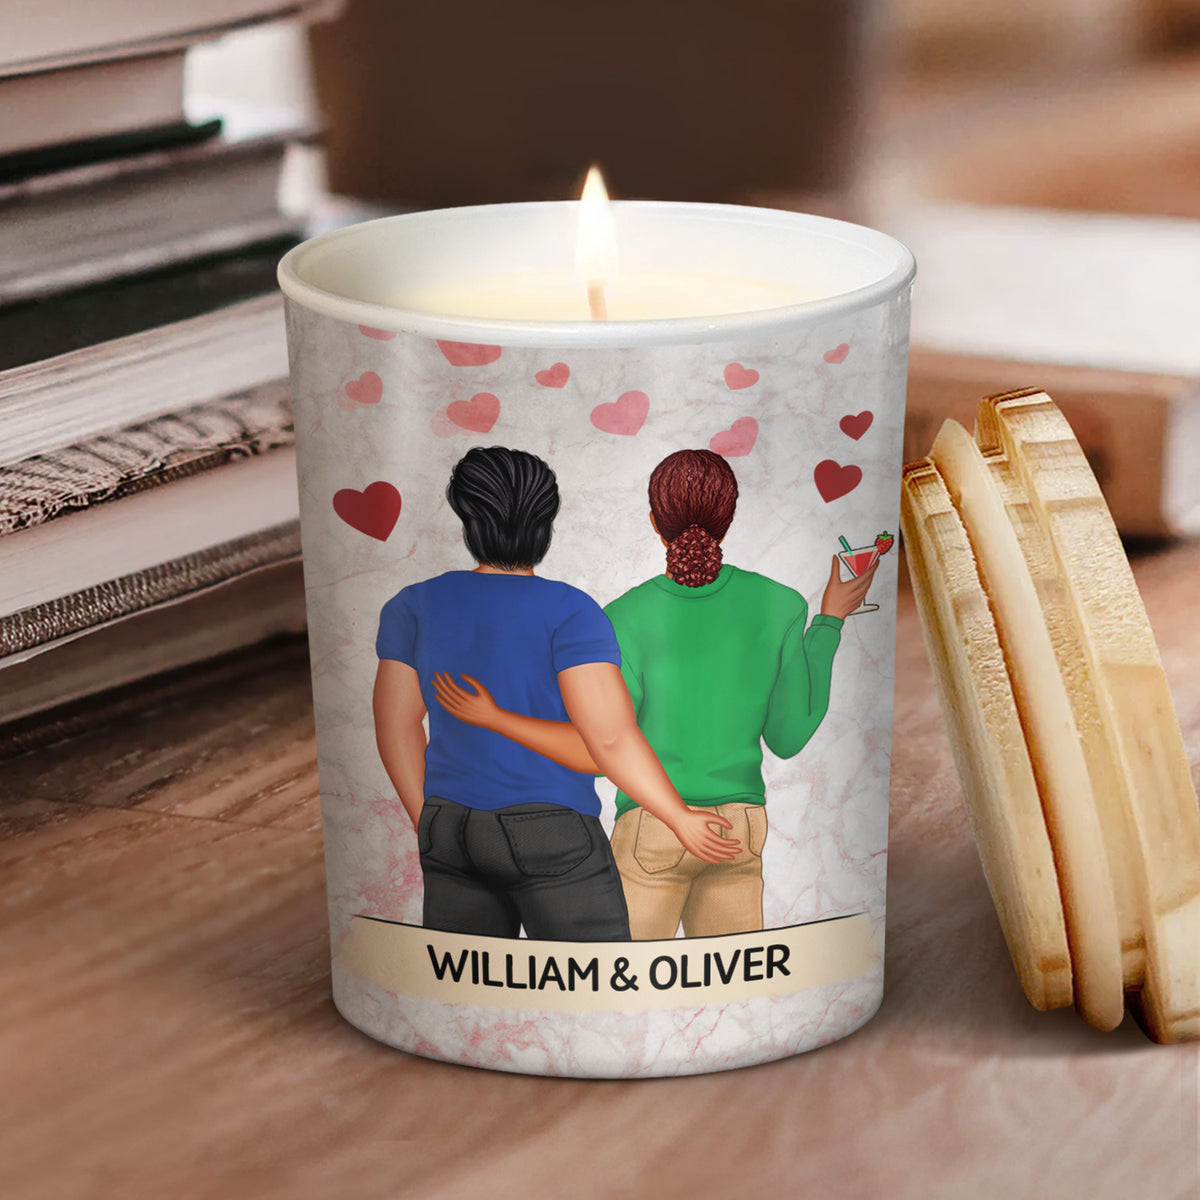 Wife Candle, Funny Wife Gifts from Husband, Birthday Gifts for Wife from  Husband